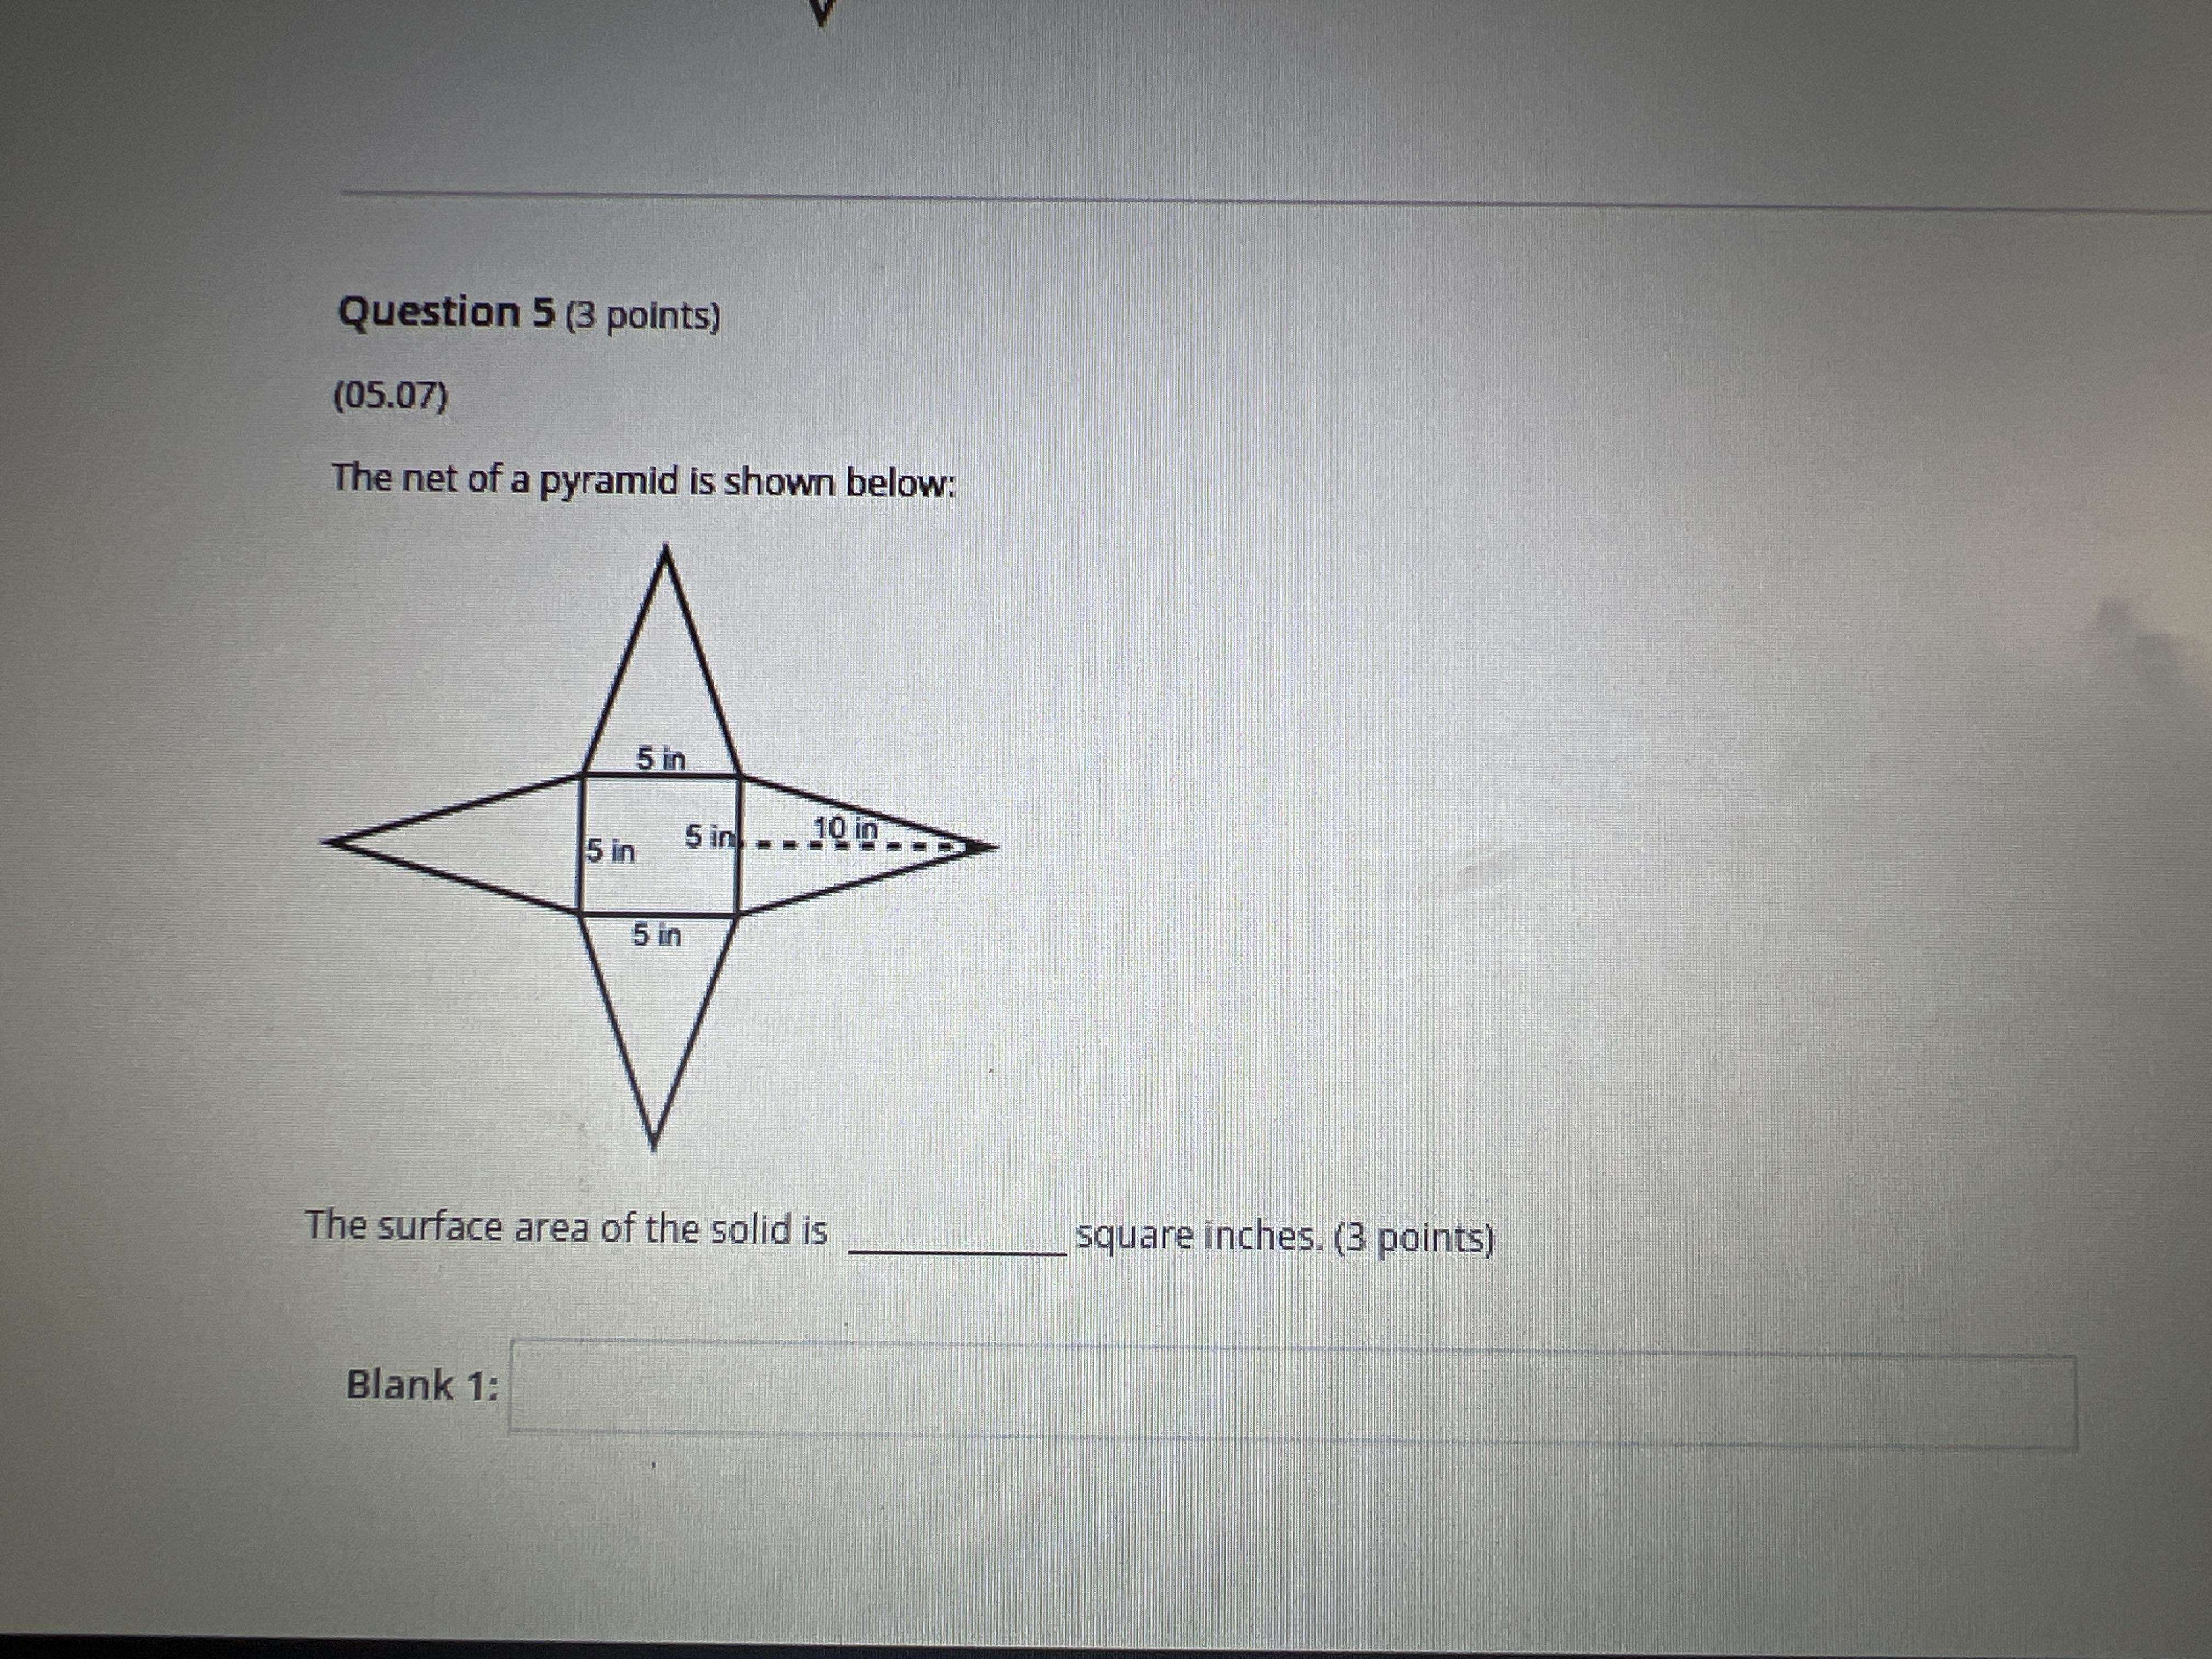 I Need Help Please Give Me An Answer For This.